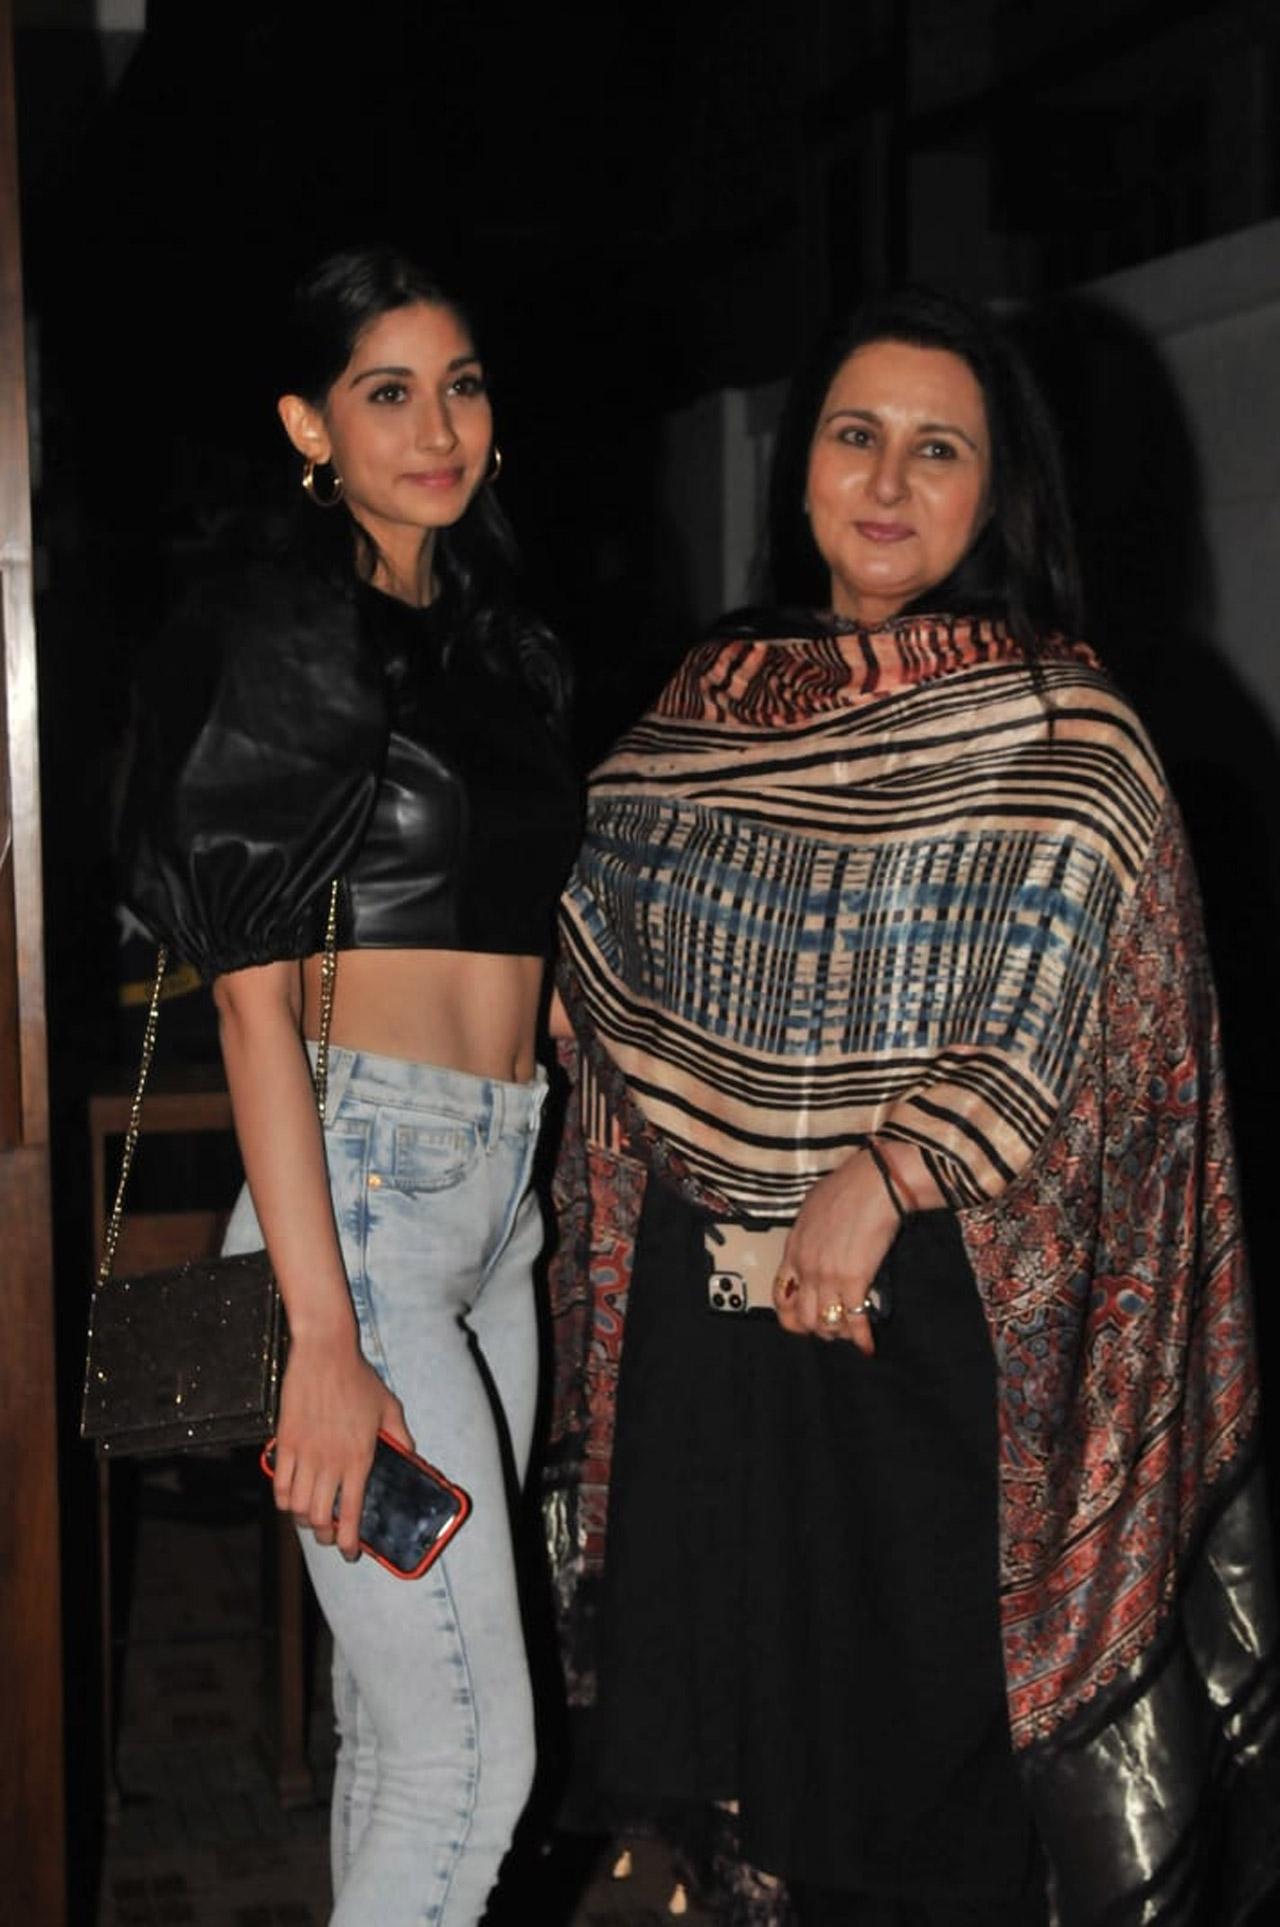 Poonam Dhillon was clicked with her daughter Paloma Thakeria at a popular restaurant in Bandra, Mumbai. Paloma is quite a sensation on Instagram and it seems that she is ready to face the camera, just like her sibling Anmol, who is set to make his Bollywood debut with the Sanjay Leela Bhansali-backed film, Tuesdays And Fridays.